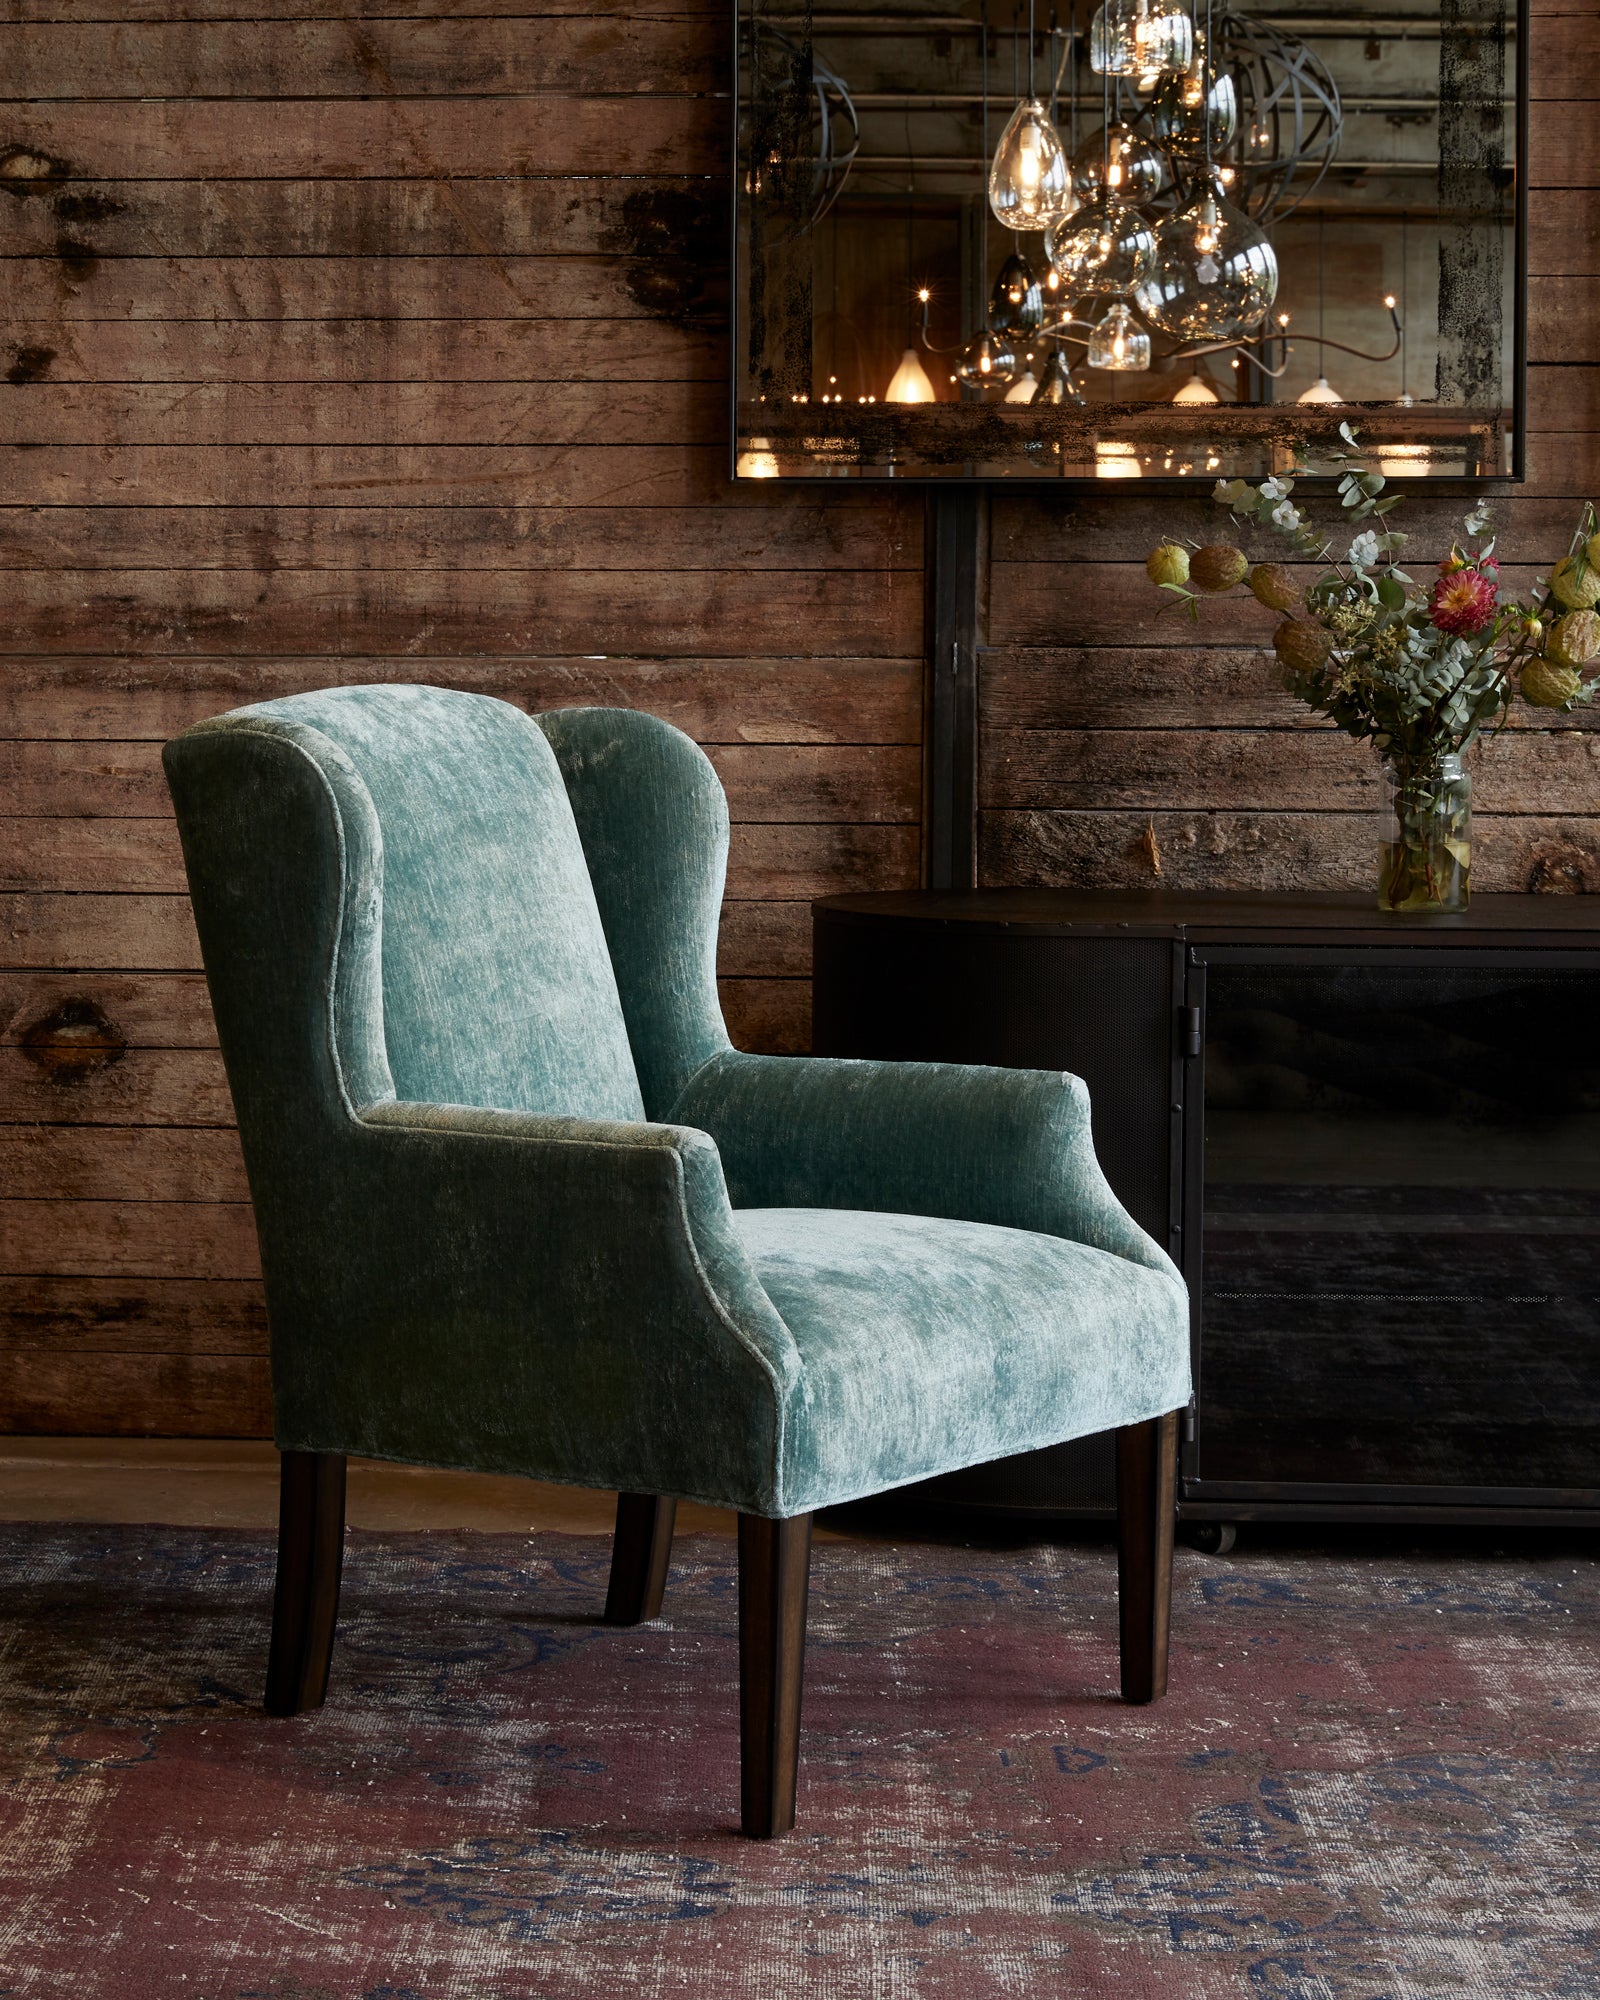  Chair in Velluto Aqua next to a dark credenza. In the background is a wood wall with a mirror and chandelier hanging. 